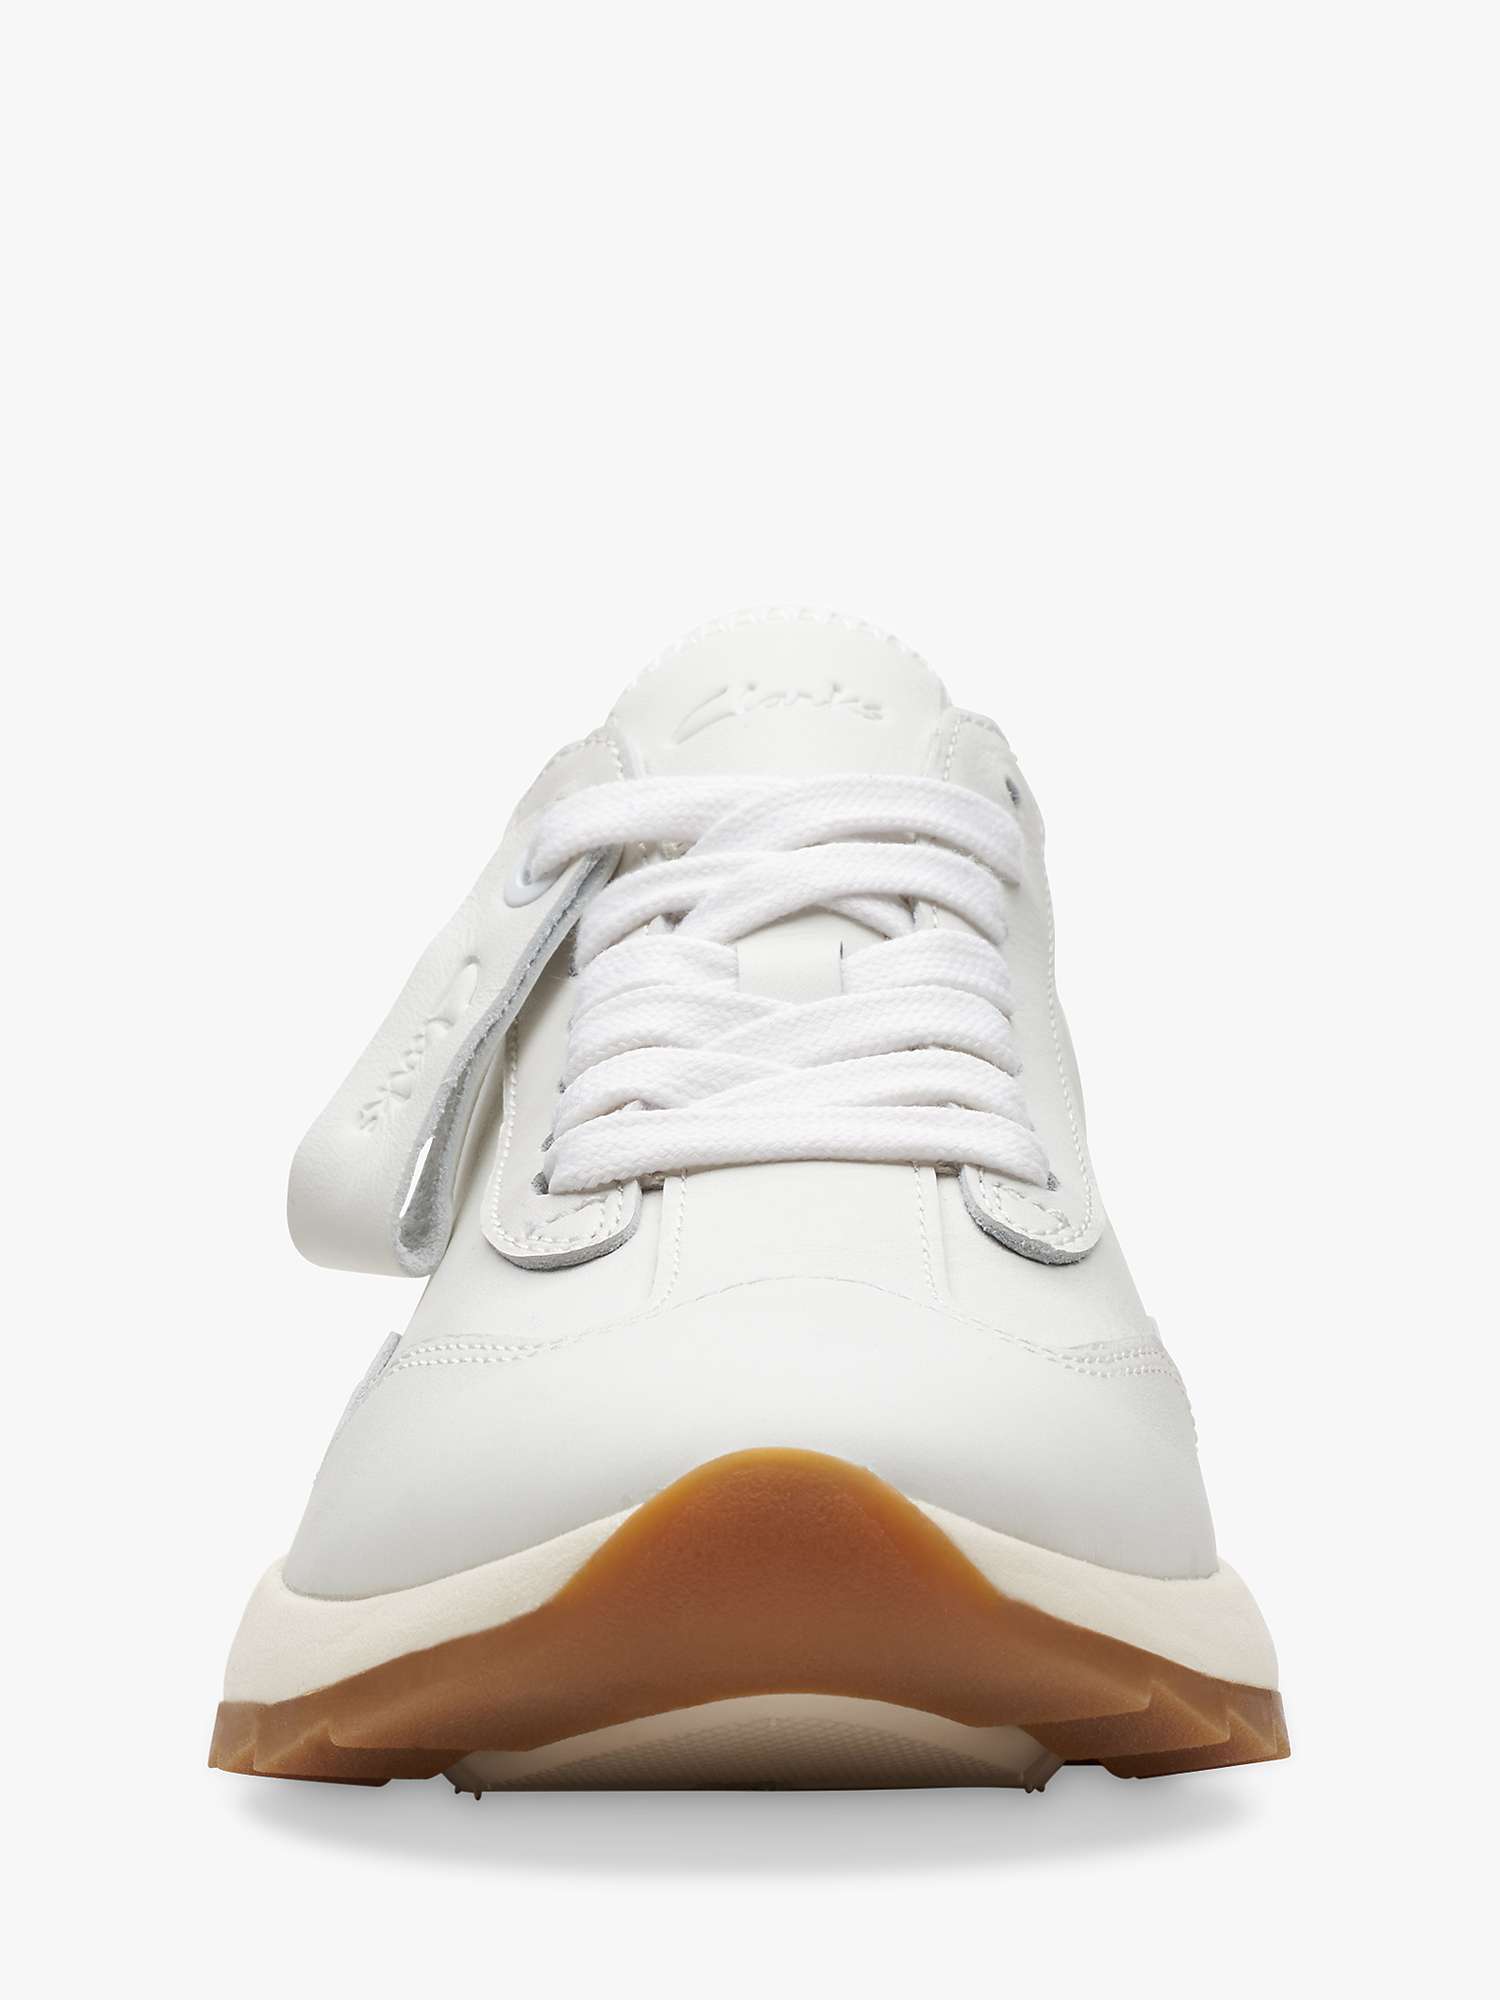 Clarks DashLite Lo Leather Trainers, White at John Lewis & Partners